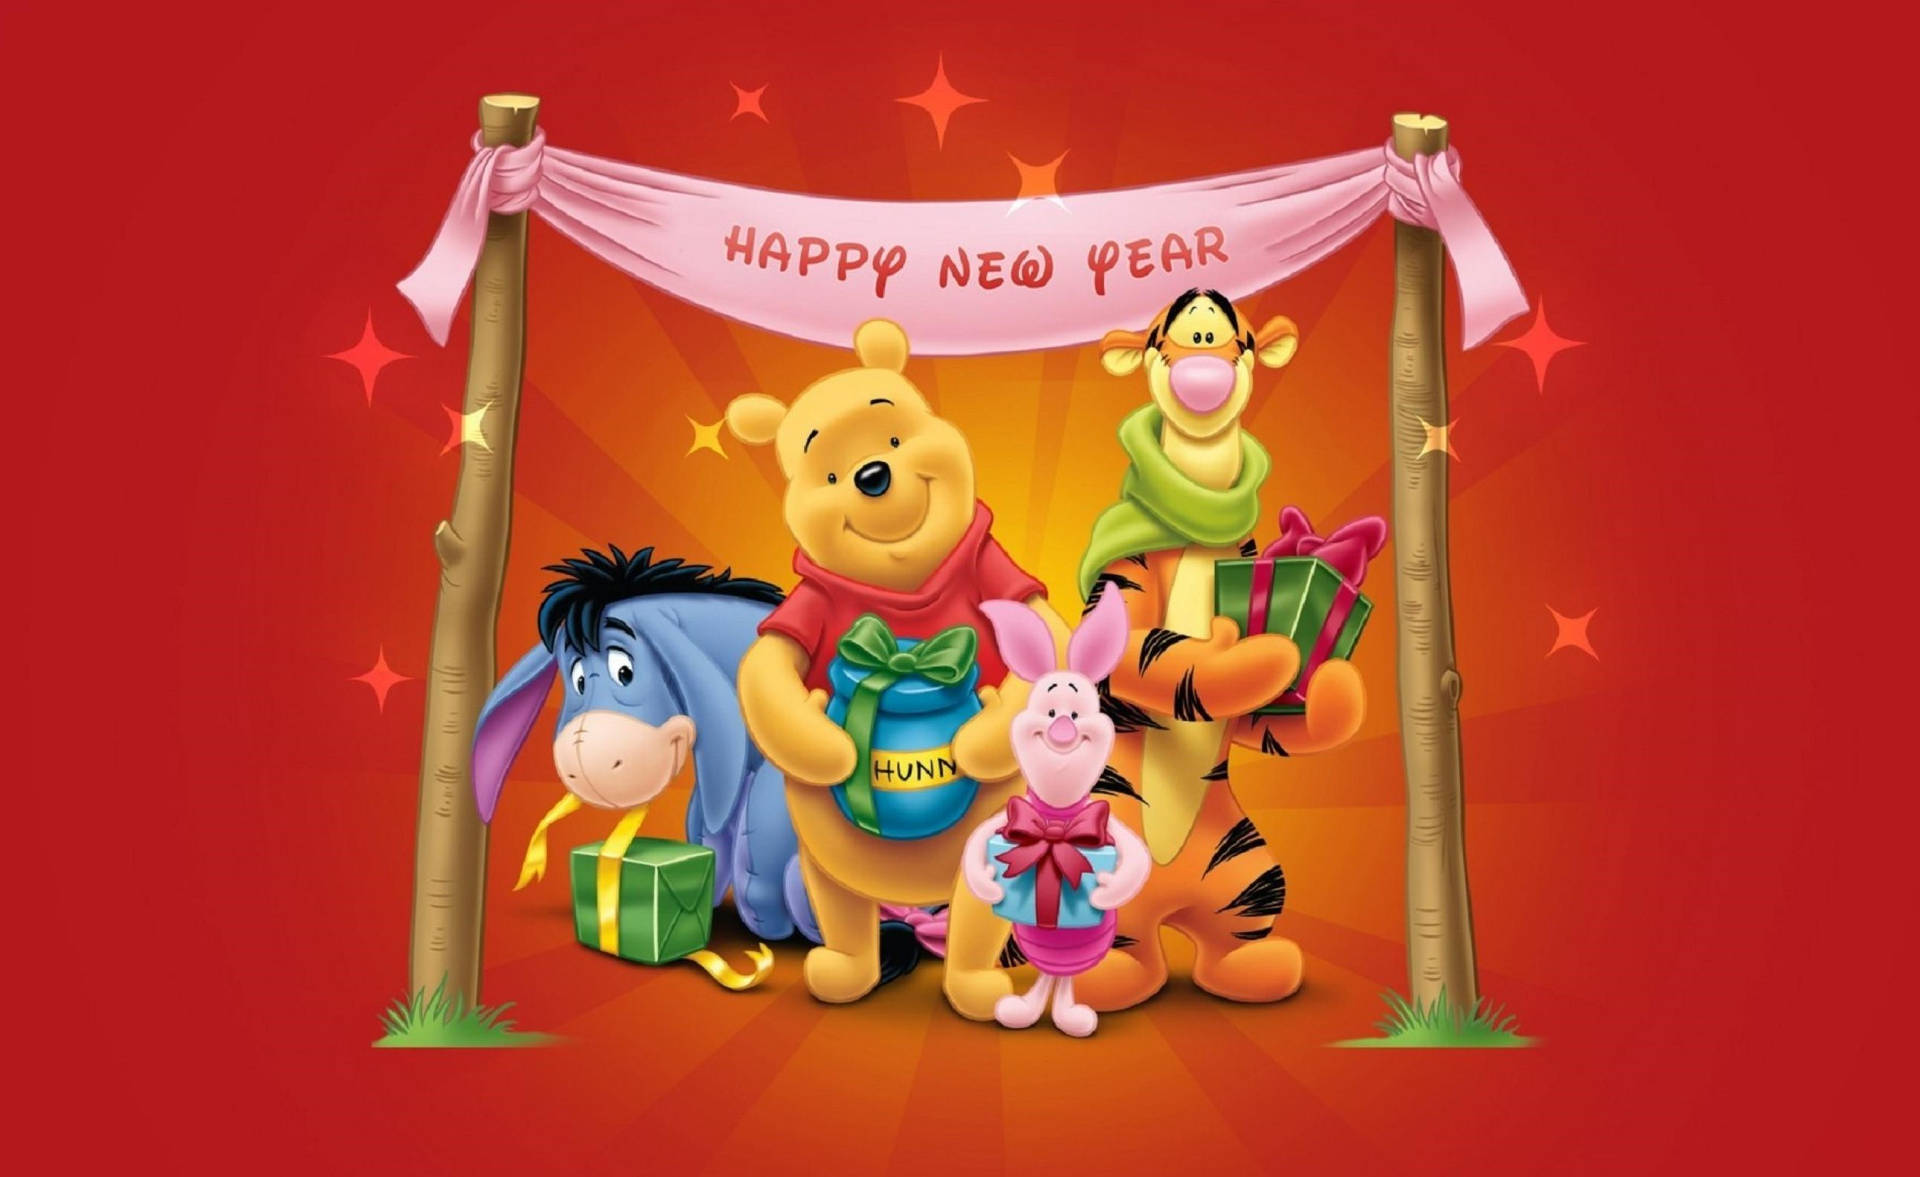 Make your Christmas extra special with friends like Winnie The Pooh! Wallpaper